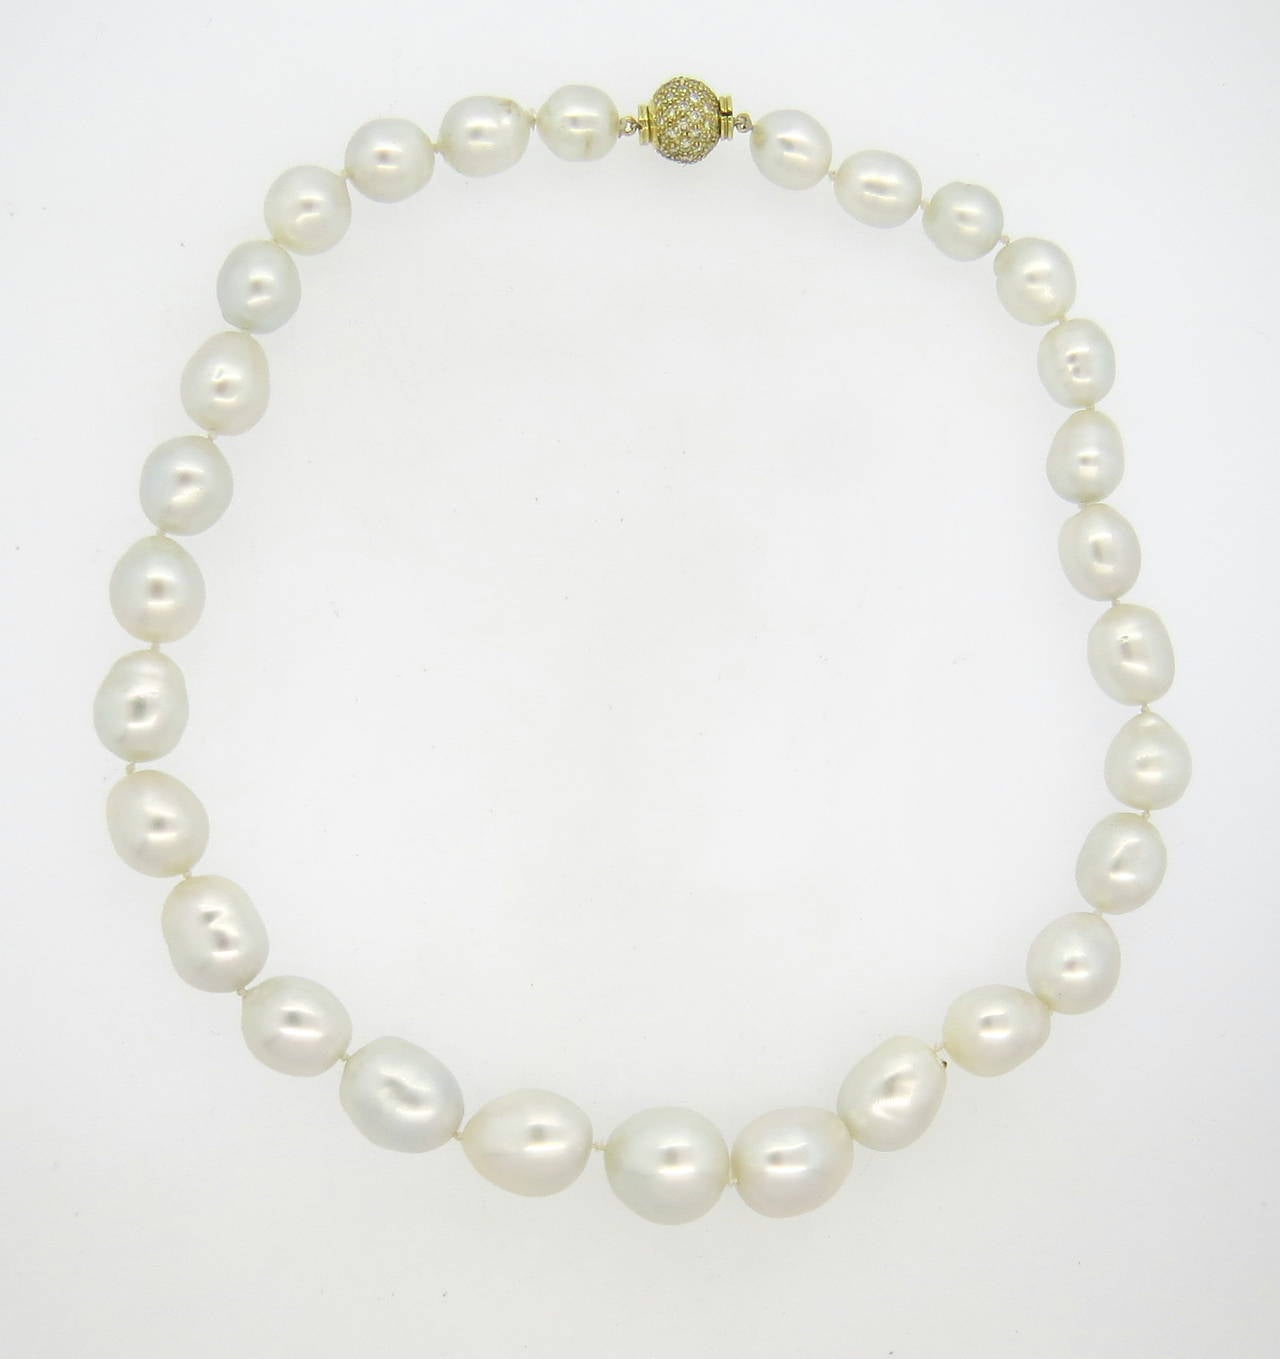 A necklace featuring graduated south sea baroque pearls ranging from 12.5mm x 10.8mm to 17.7mm x 18mm and an 18k gold clasp set with approximately 0.70ctw of G/VS diamonds.  The necklace is 19.5